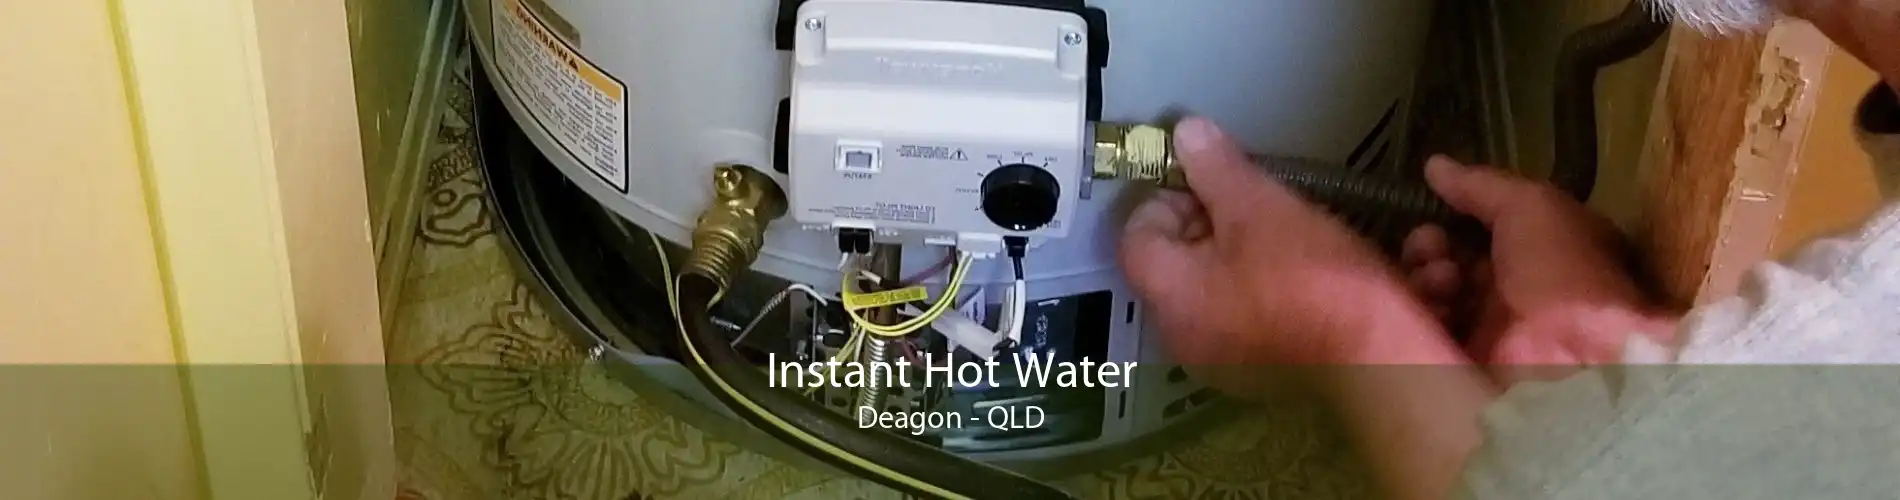 Instant Hot Water Deagon - QLD